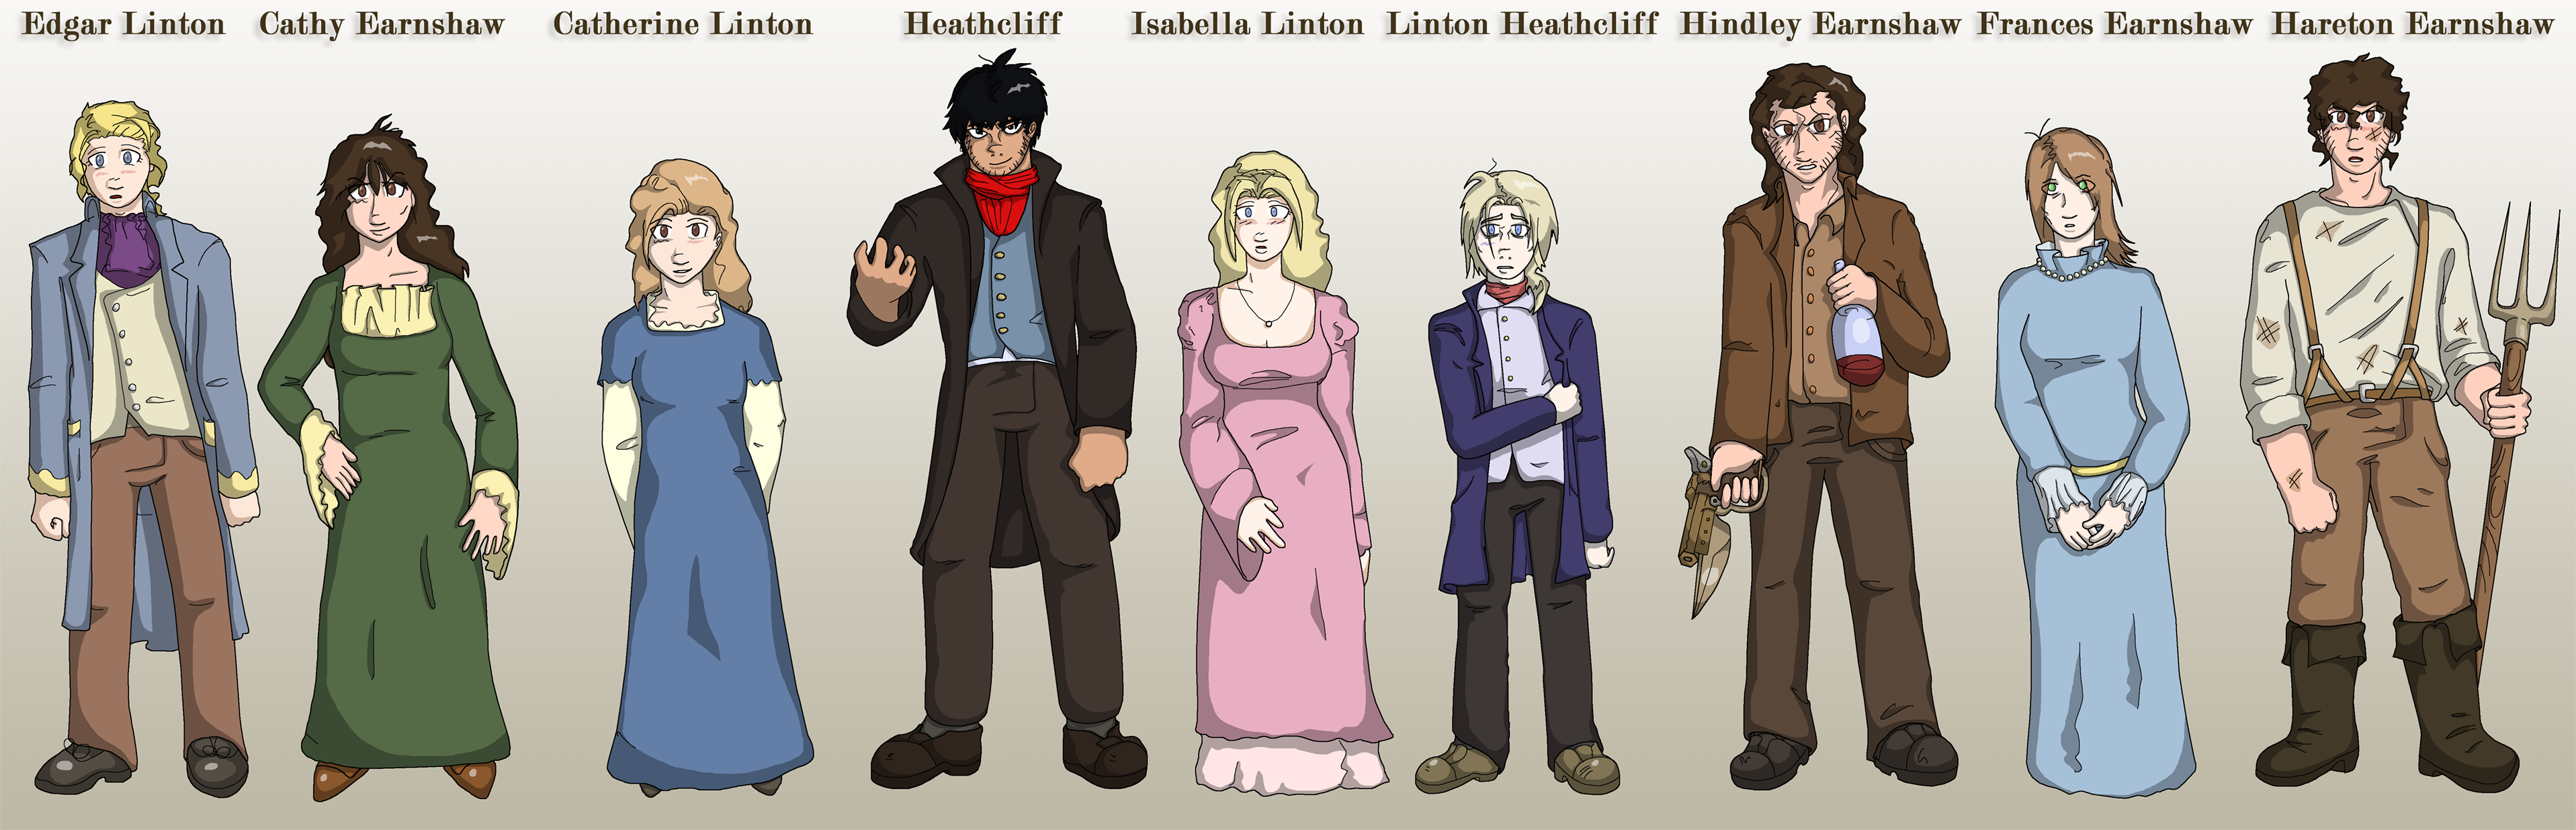 Wuthering Heights Cast